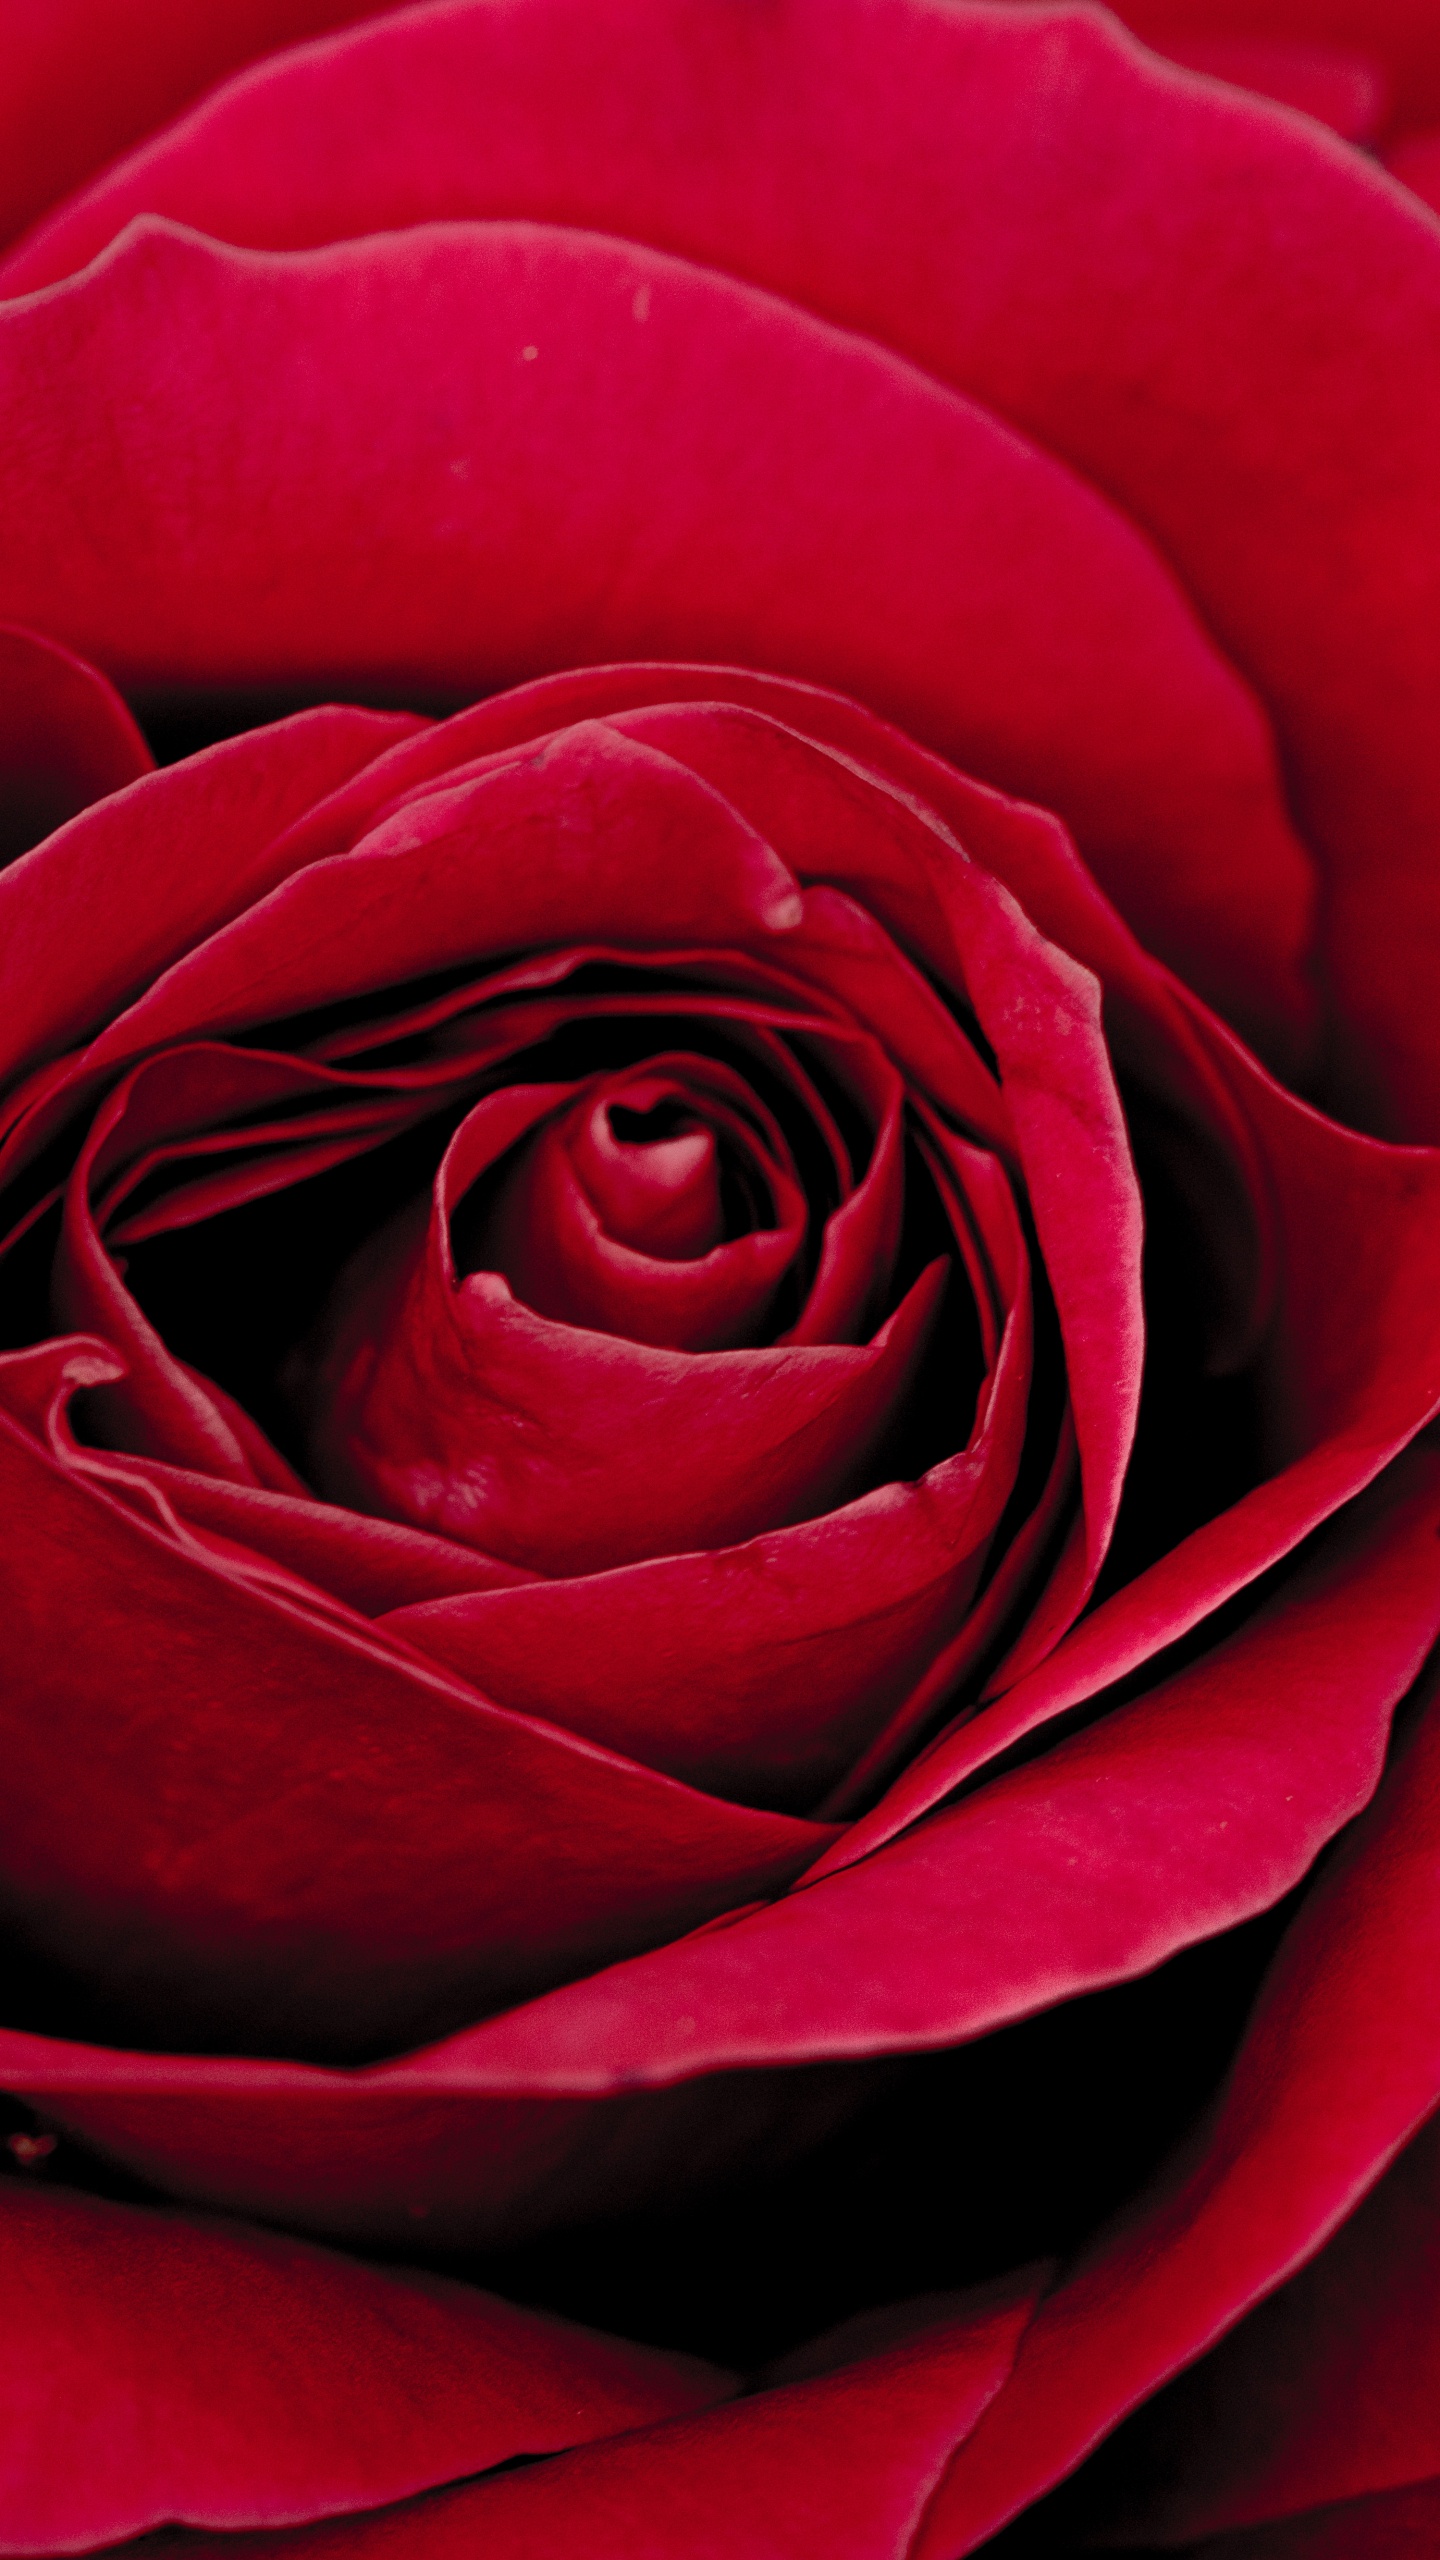 Red Rose in Bloom Close up Photo. Wallpaper in 1440x2560 Resolution